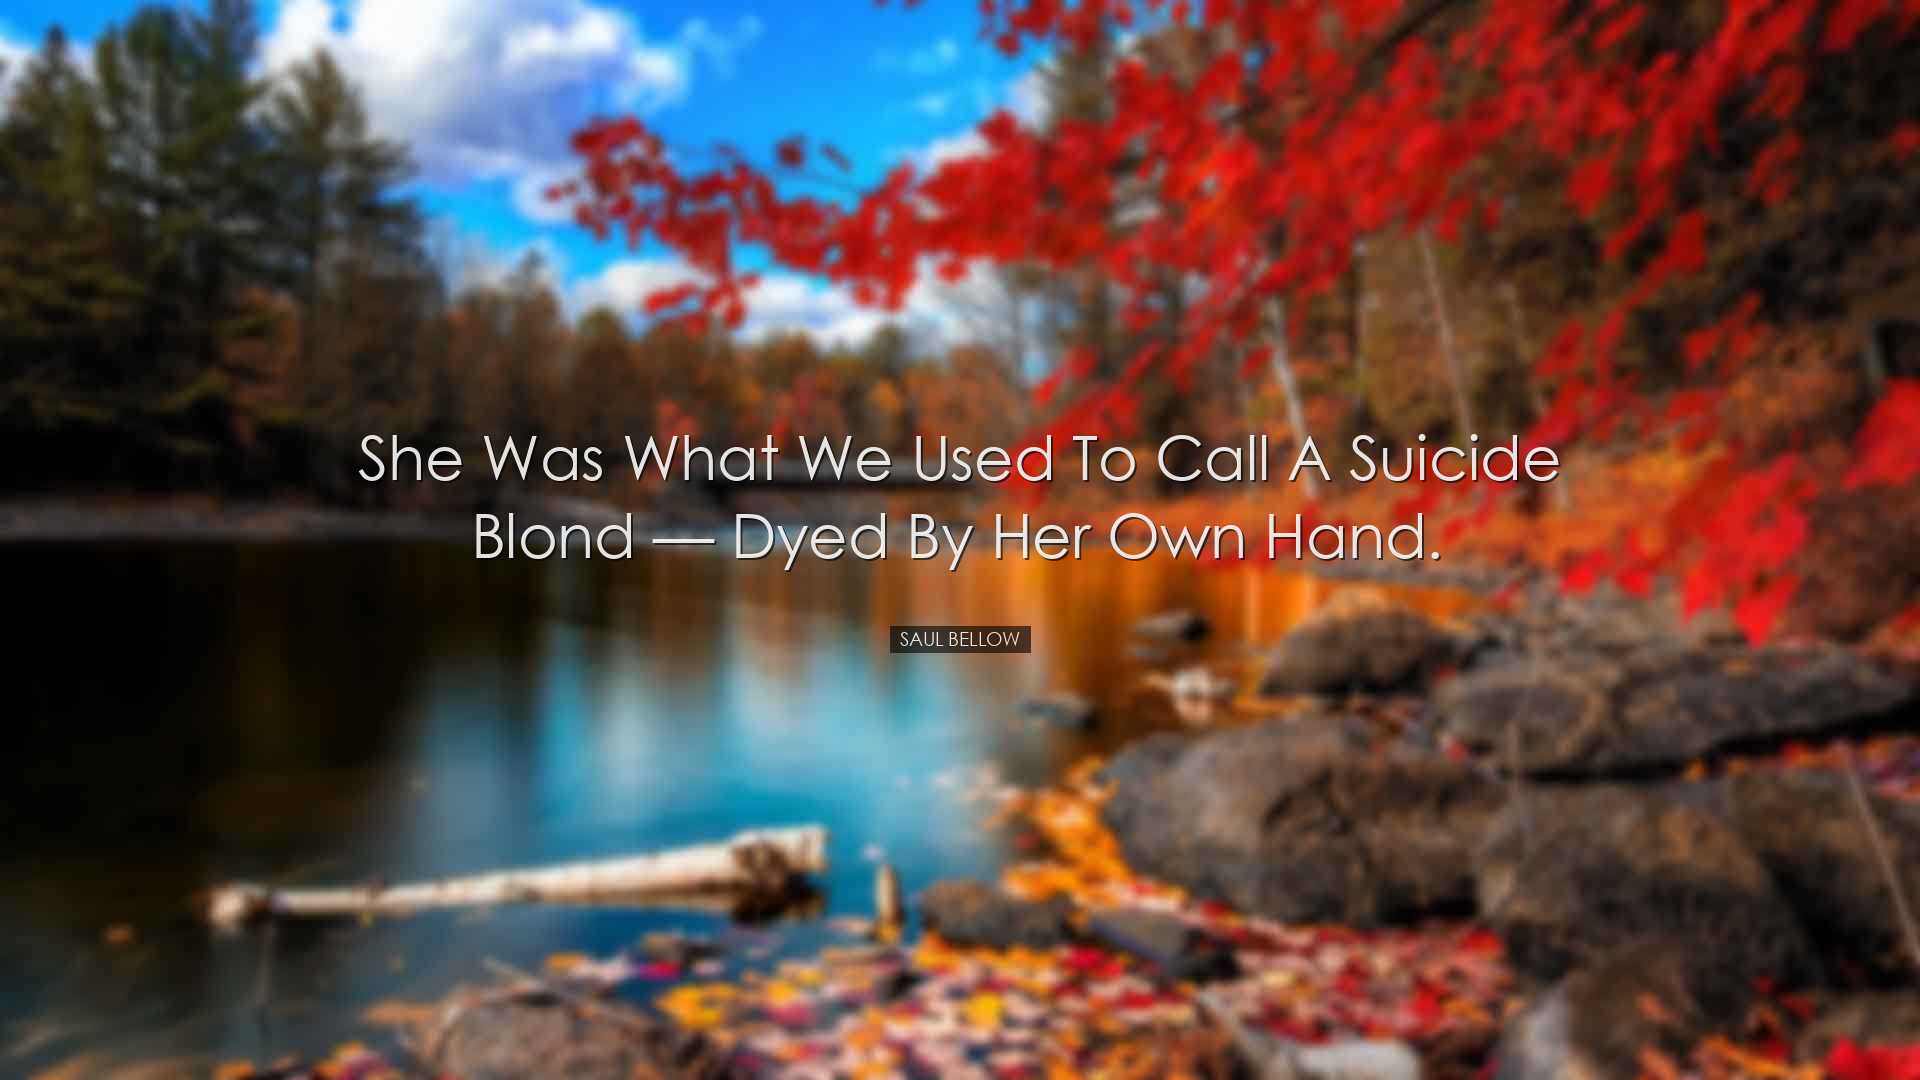 She was what we used to call a suicide blond â€” dyed by her